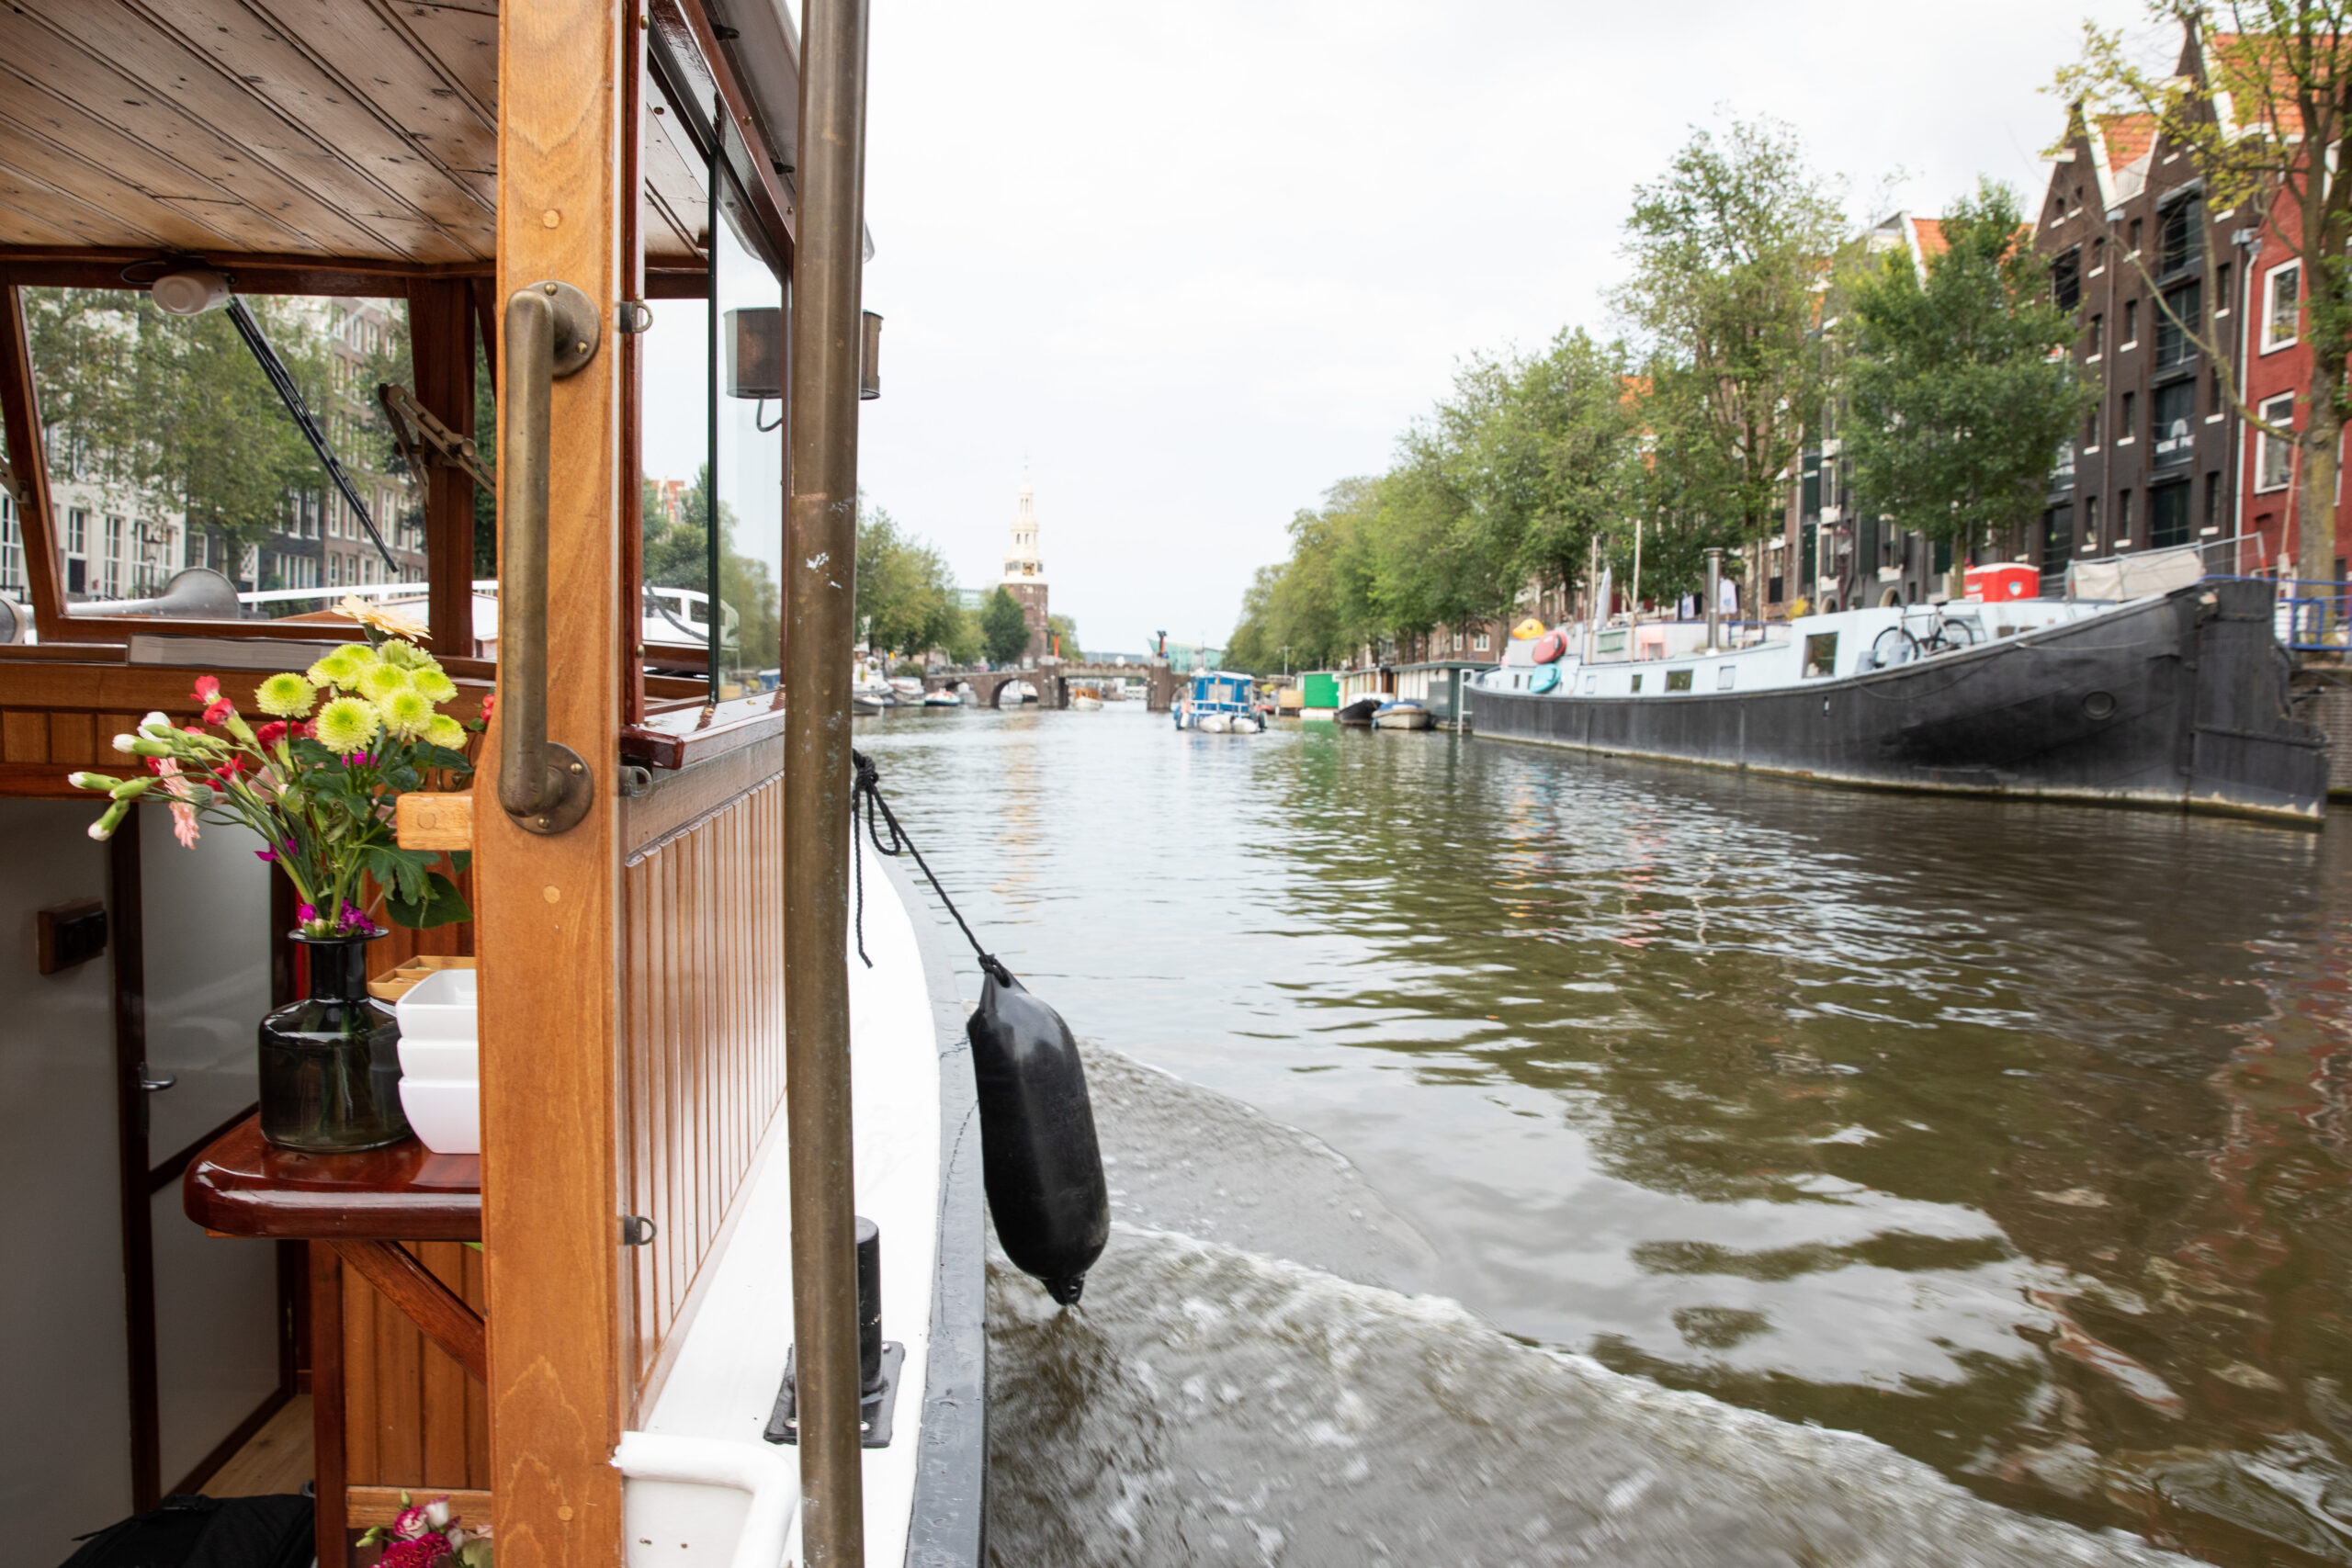 sebi boat tours amsterdam for daily canal cruise